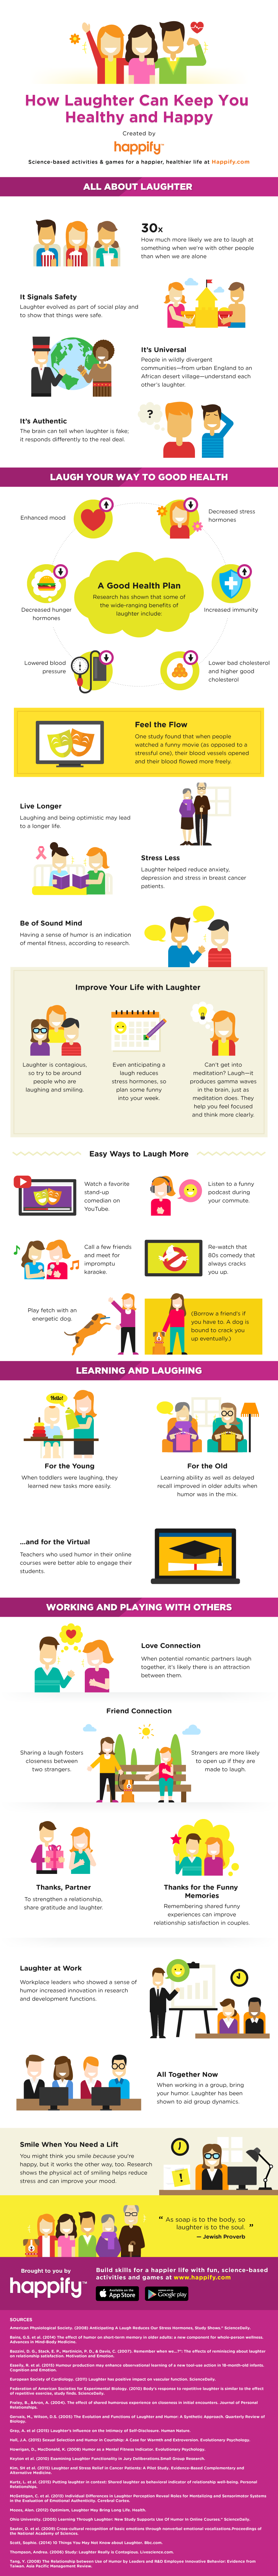 How Laughter Can Keep You Healthy and Happy by Happify 